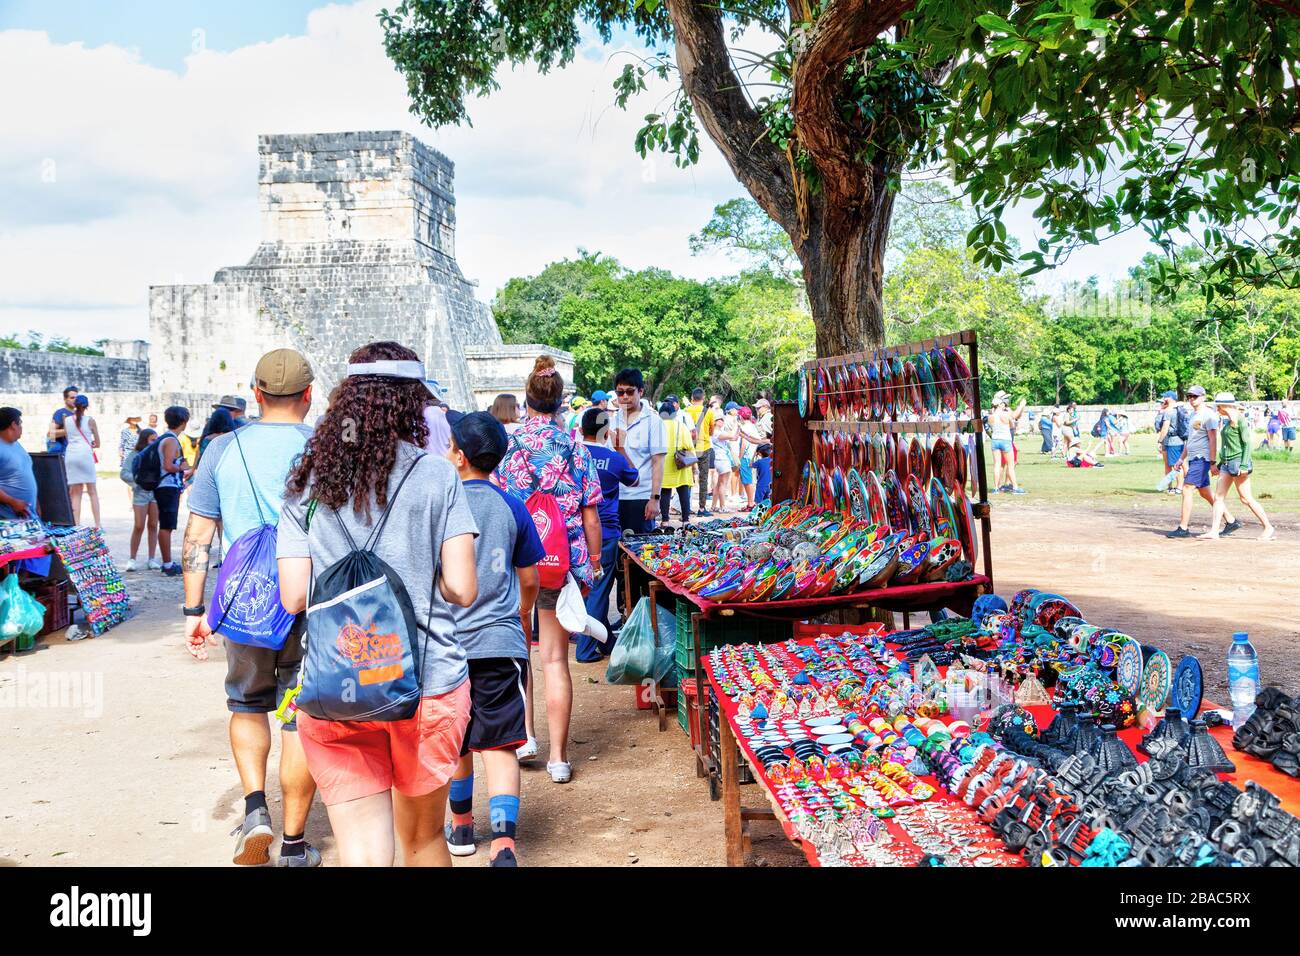 Chichen Itza, Mexico - Dec. 23, 2019: Tourists walking toward the archaeological city of Chichen Itza in the Yucatan Peninsula of Mexico were met by r Stock Photo